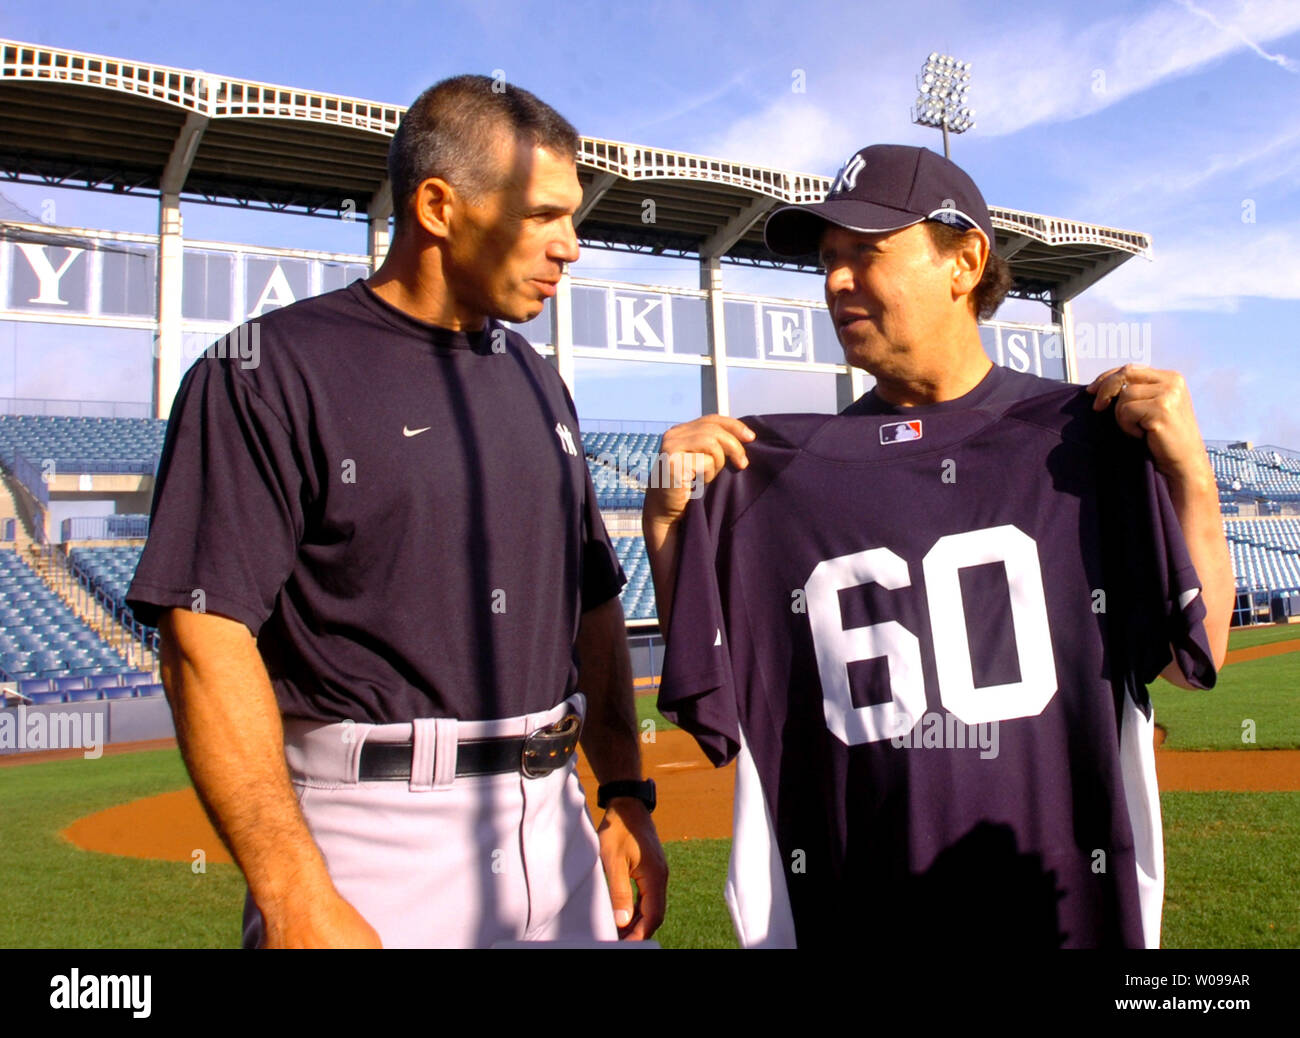 https://c8.alamy.com/comp/W099AR/new-york-yankees-manager-joe-girardi-l-presents-a-team-jersey-to-comedian-billy-crystal-after-crystal-signed-a-one-game-contract-with-the-team-at-legends-field-in-tampa-florida-on-march-12-2008-crystal-will-turn-60-on-march-14-and-it-was-his-birthday-wish-to-become-a-new-york-yankee-team-member-upi-photocathy-kapulka-W099AR.jpg